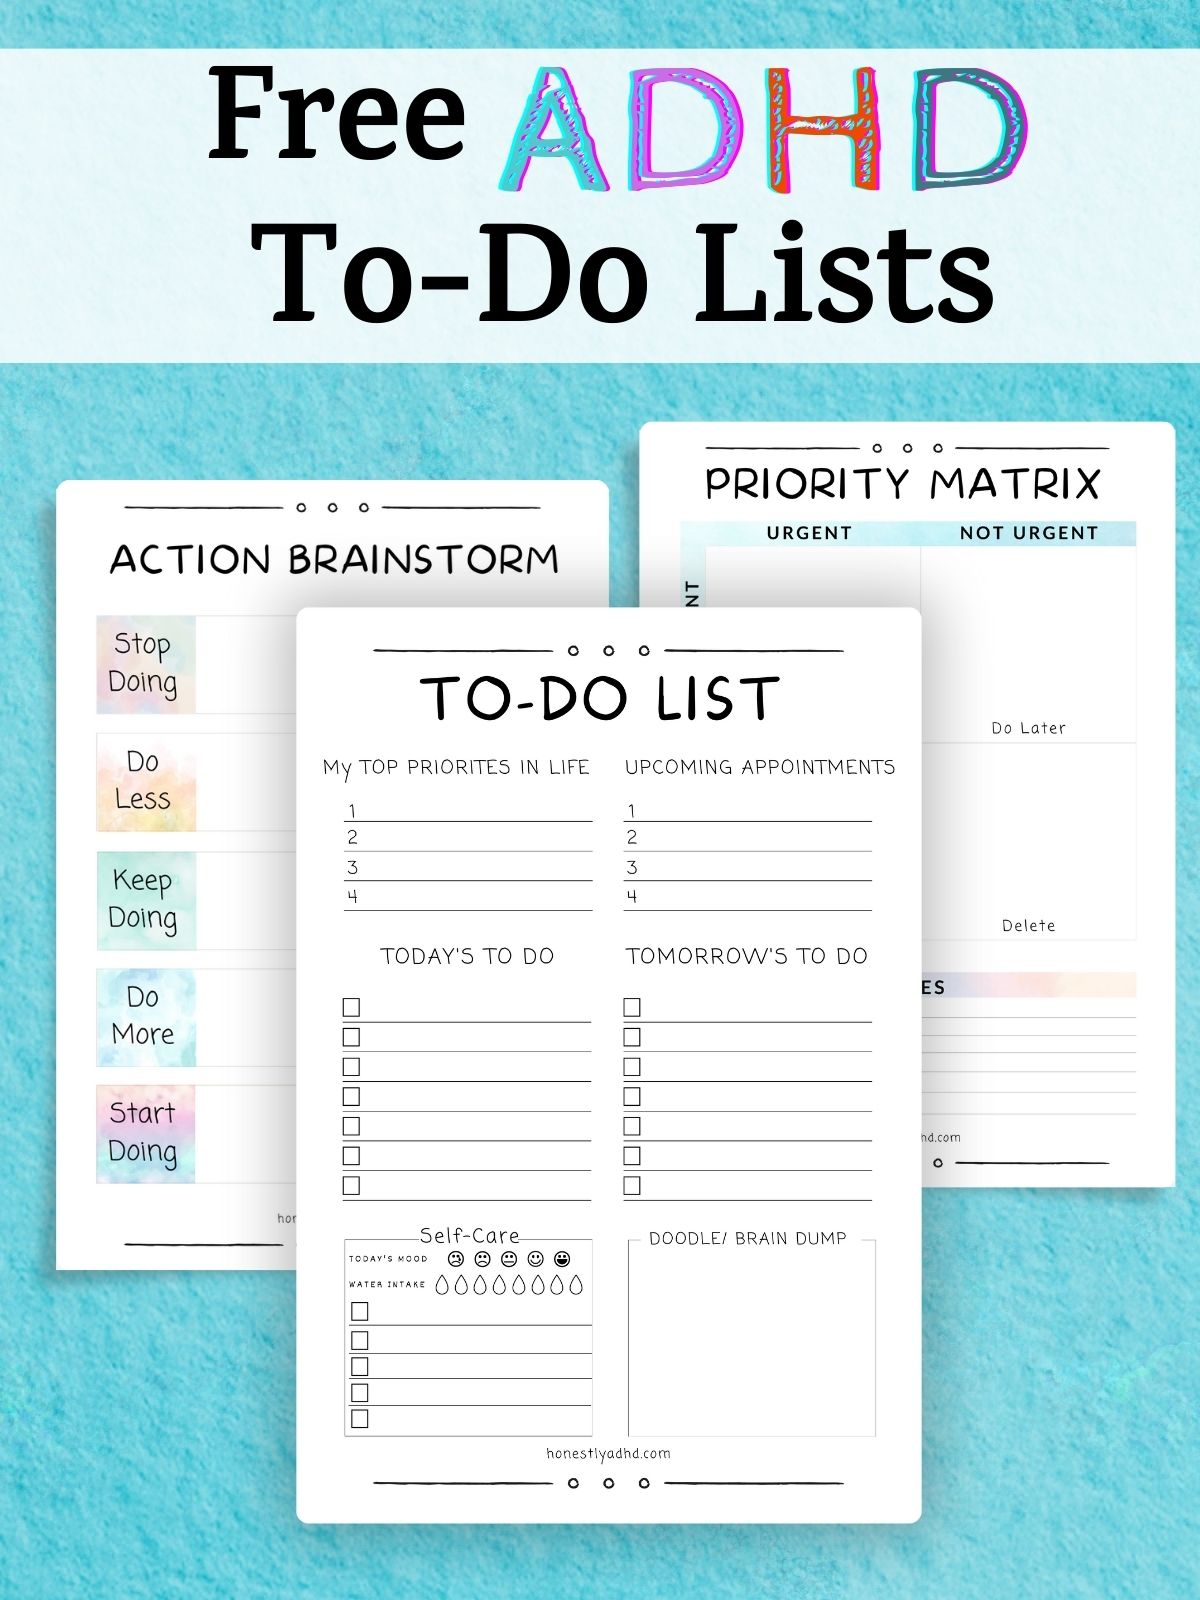 Examples of 3 free ADHD to-do list printable files with the text "Free ADHD To Do Lists"